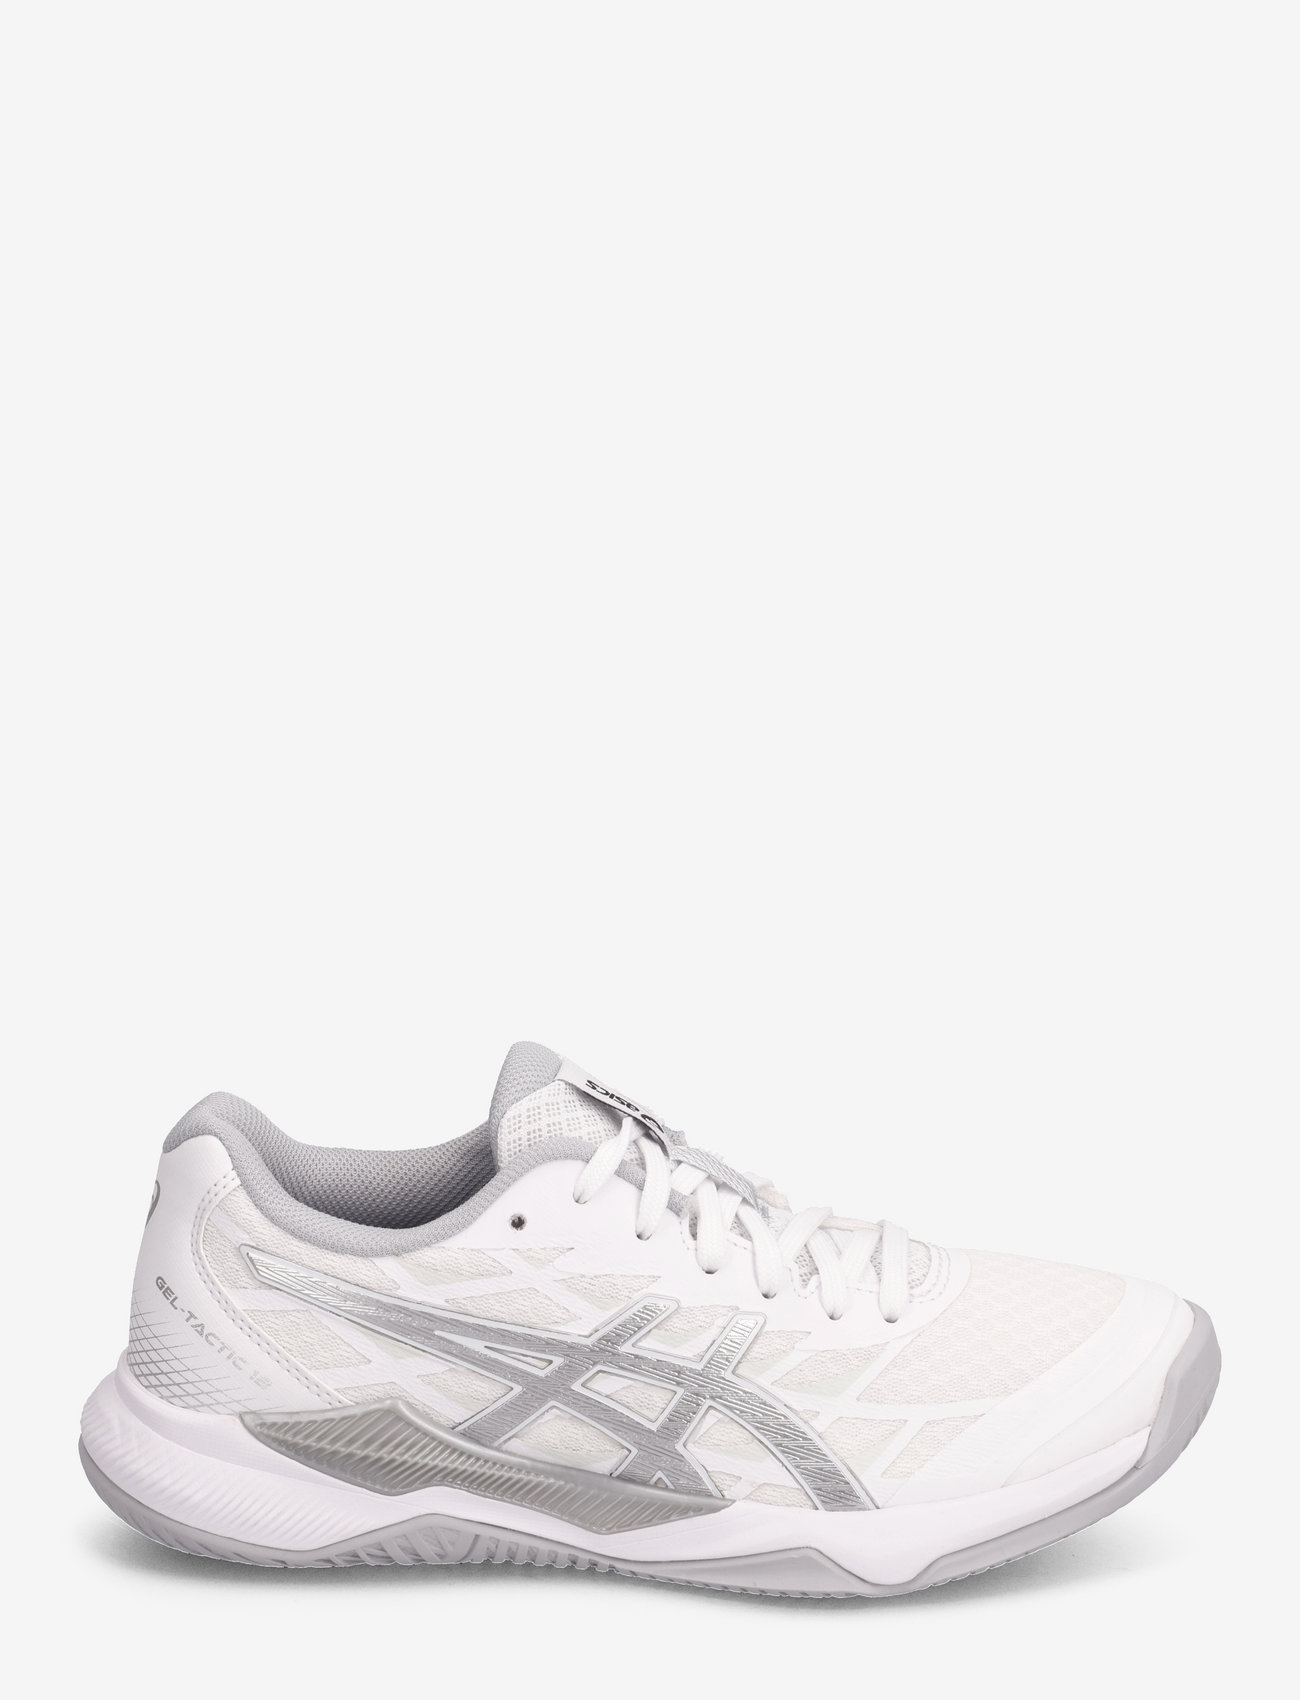 Asics - GEL-TACTIC 12 - white/pure silver - 1